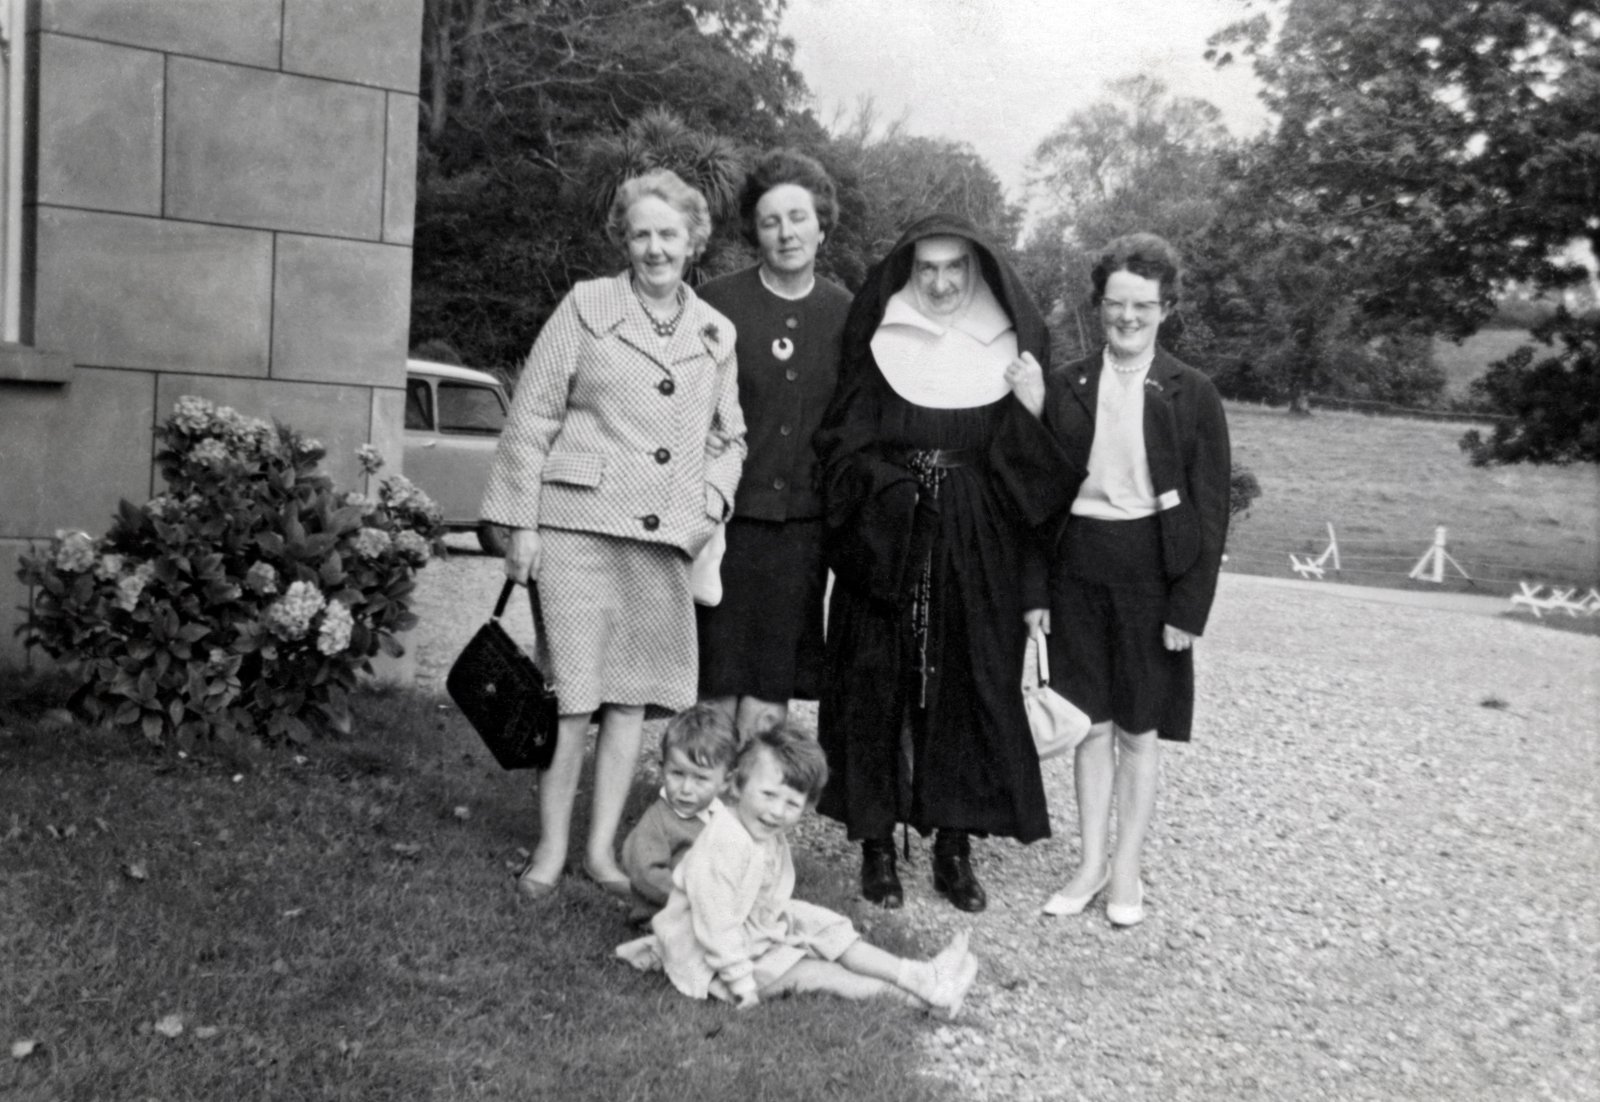 Dillon family group visiting Sister Anne Dillon in Clonakilty, West Cork in the early 1960s.